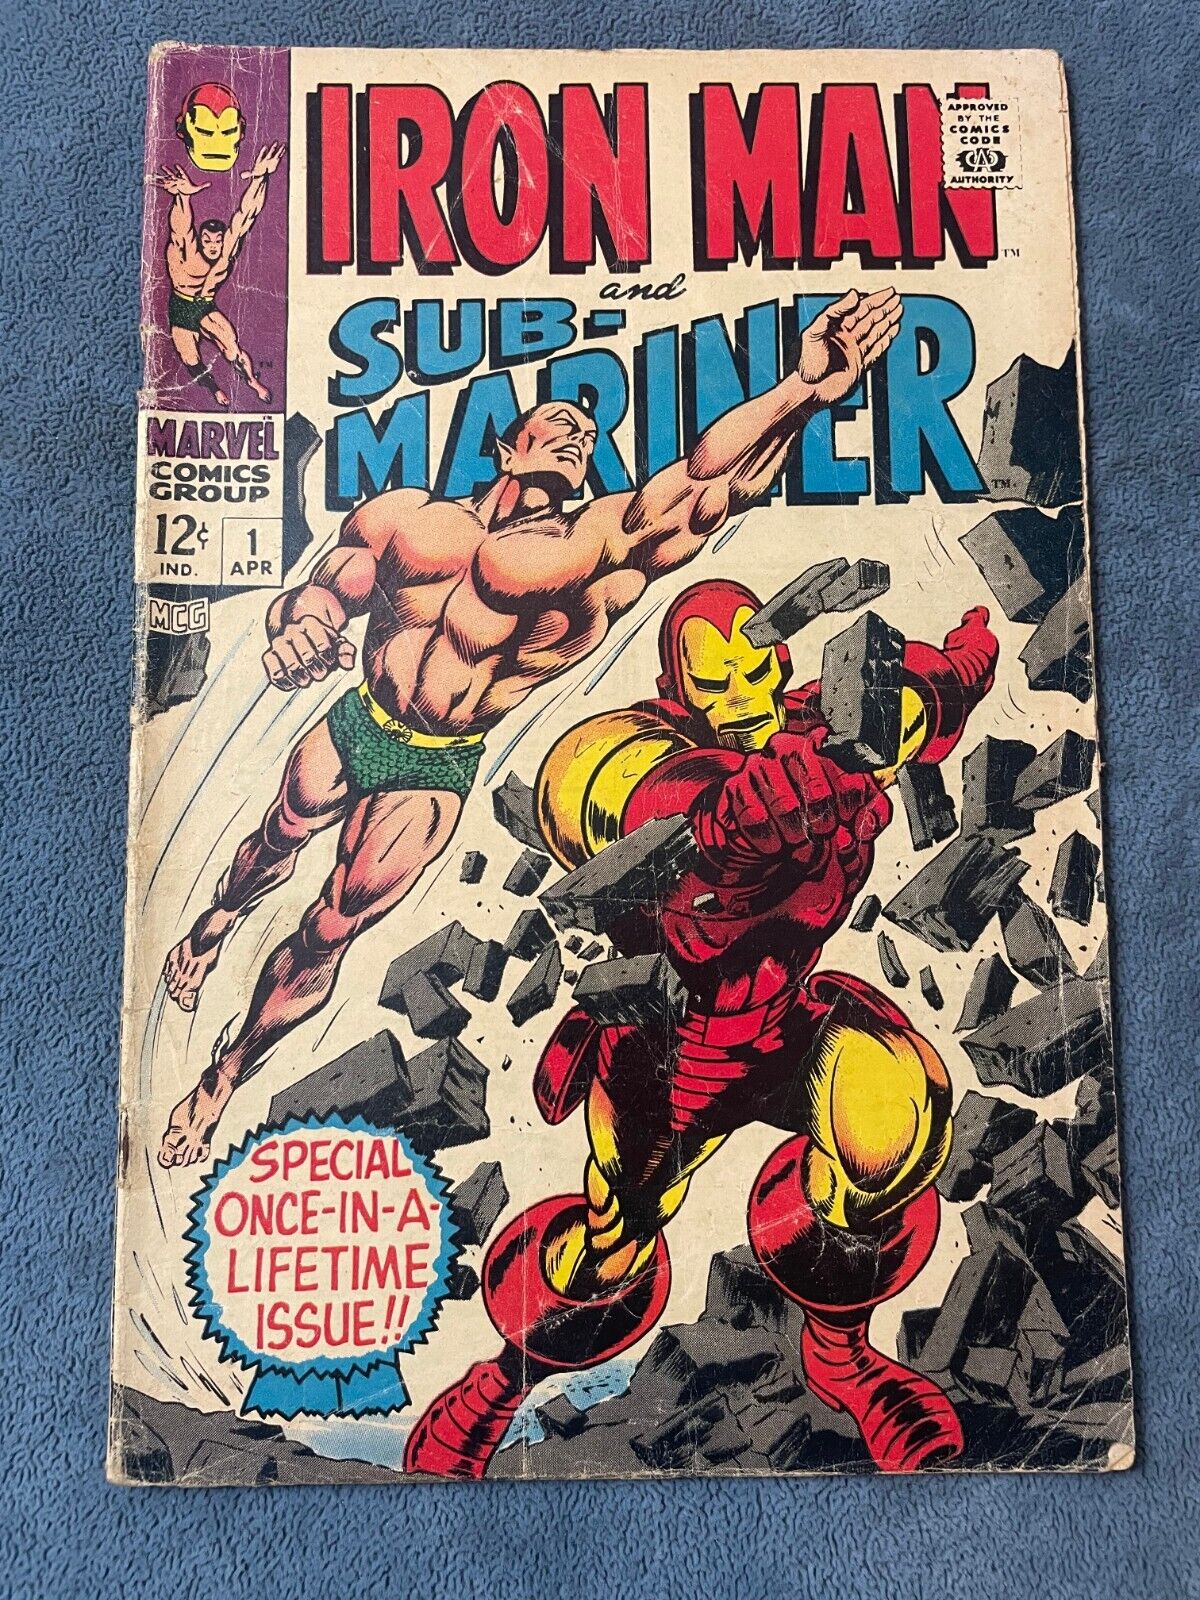 Iron Man and Sub-Mariner #1 1968 Marvel Comic Book Gene Colan Cover Low Grade